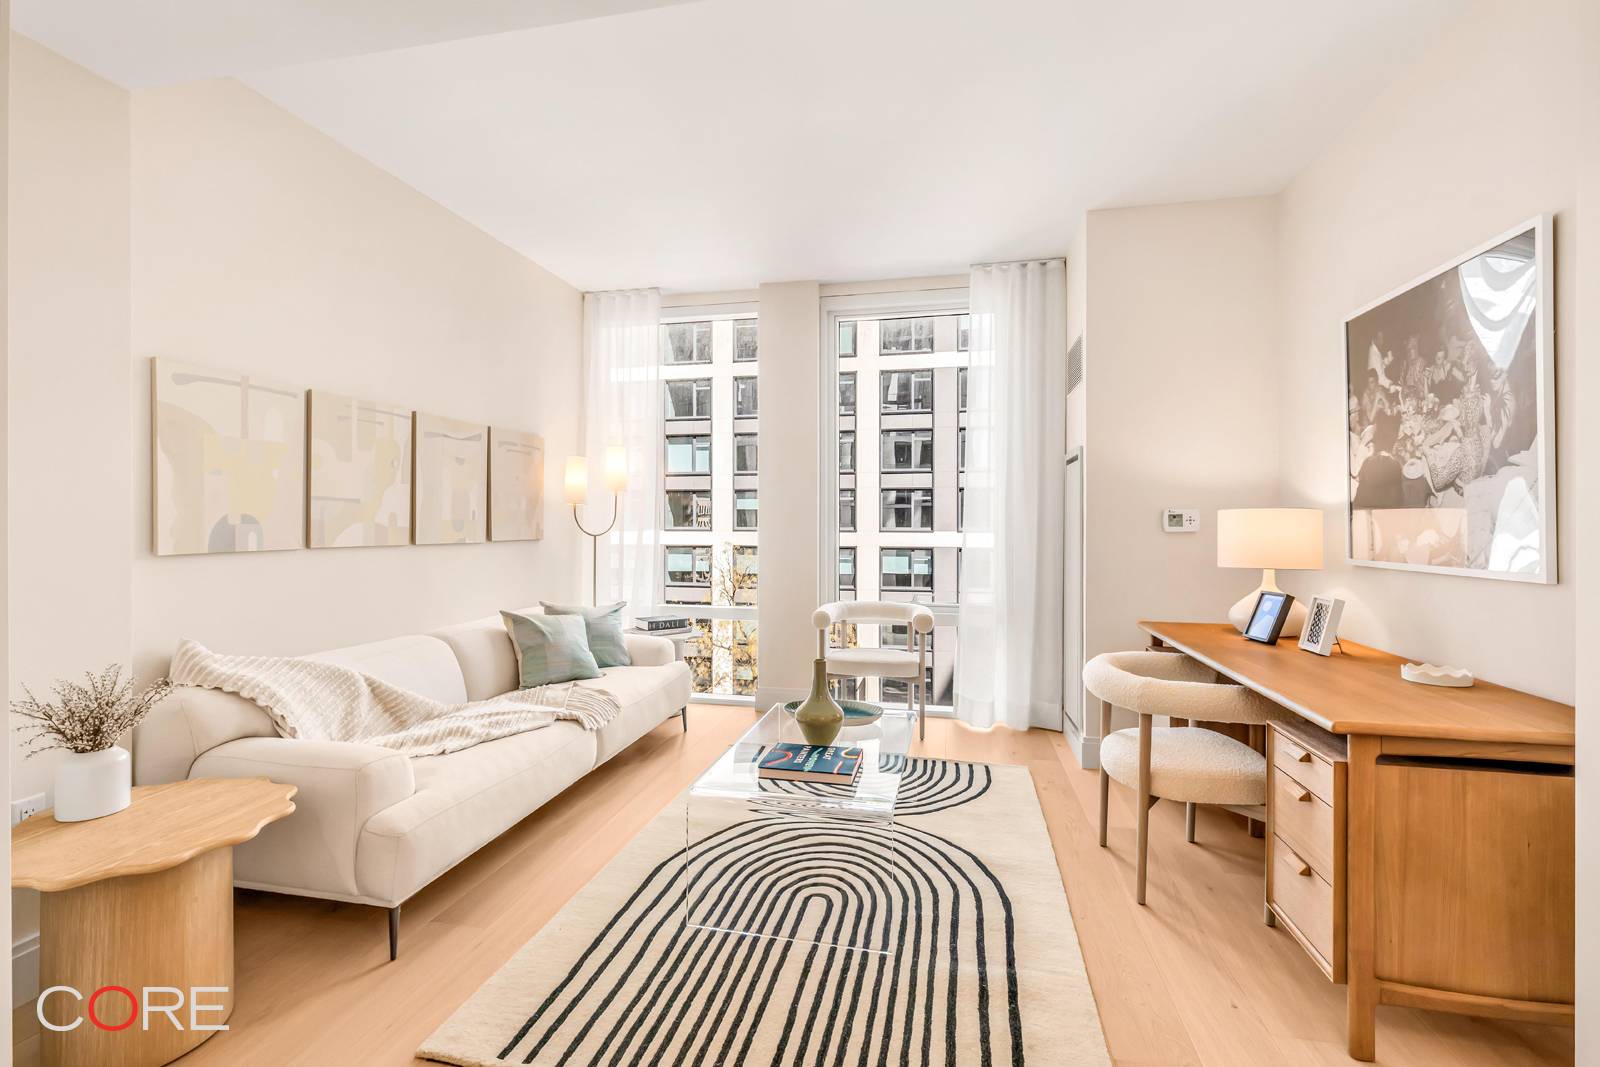 Private In Person amp ; Virtual Appointments Available Immediate Occupancy Upon entering this charming 488 square foot L shaped studio residence, you are greeted by a welcoming foyer, complete with ...